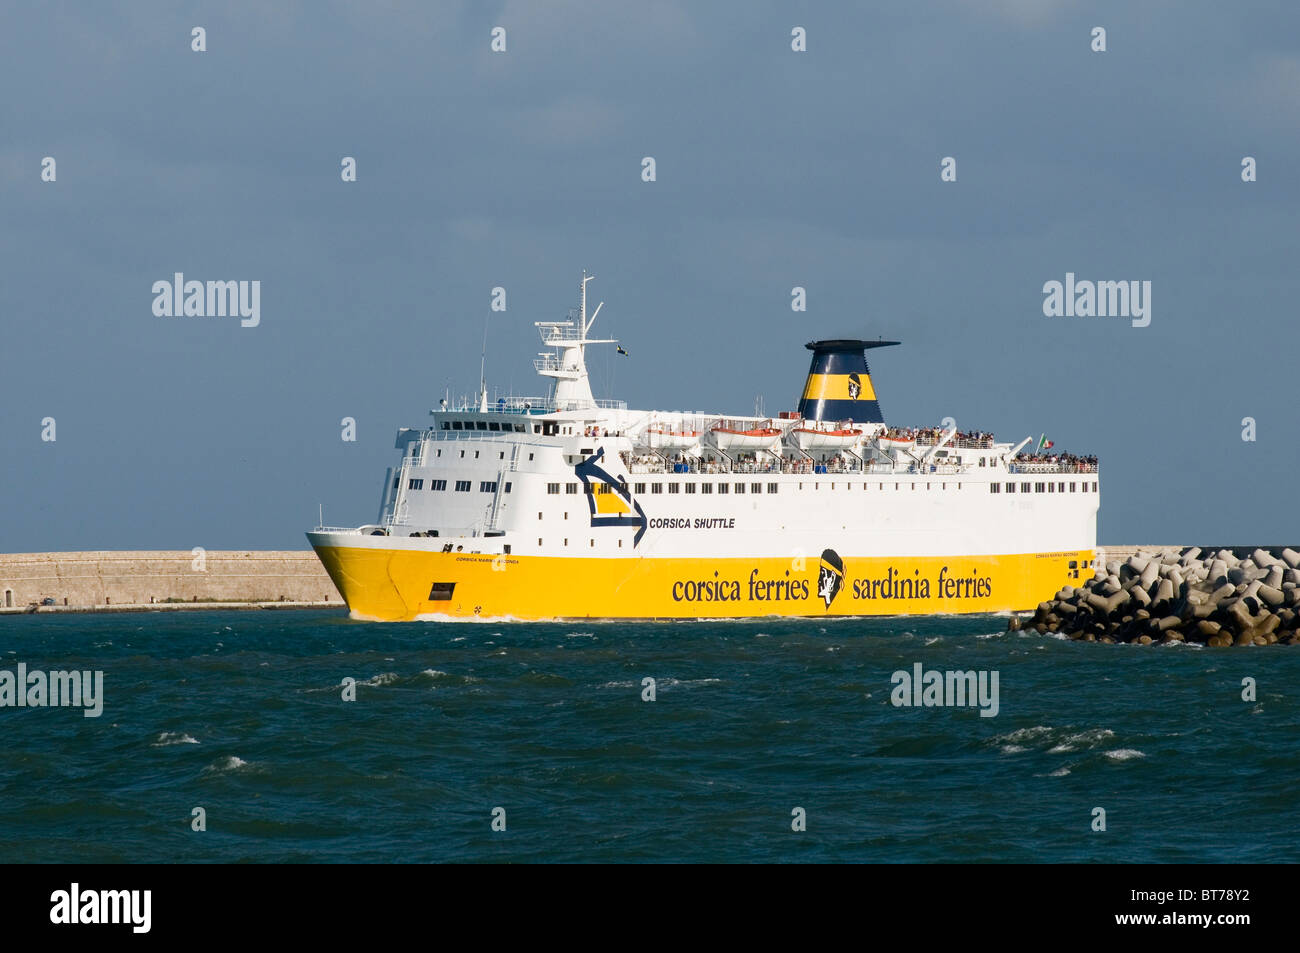 ferry ferries car boat boats ocean going large ship Corsica Sardinia ...